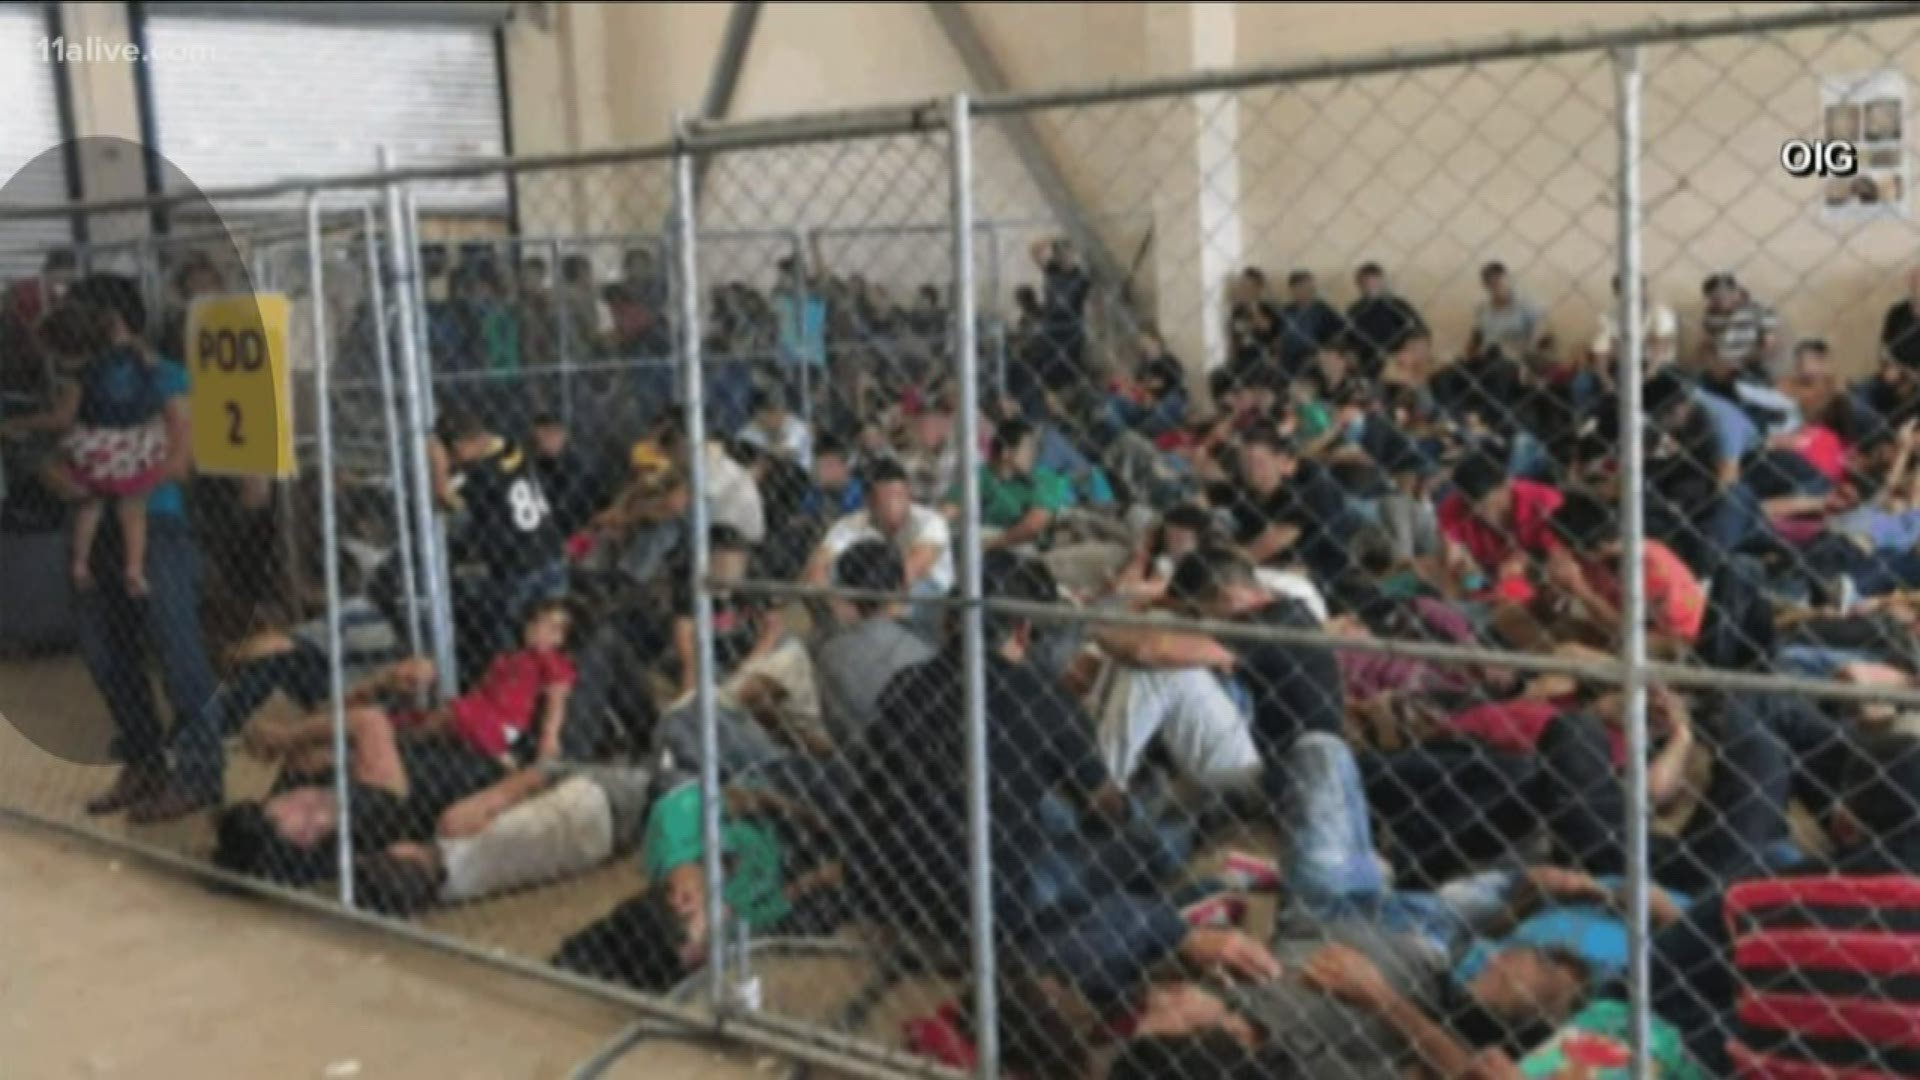 The images were released on the same day as protesters nationwide called for closure of detention centers along the US - Mexico border